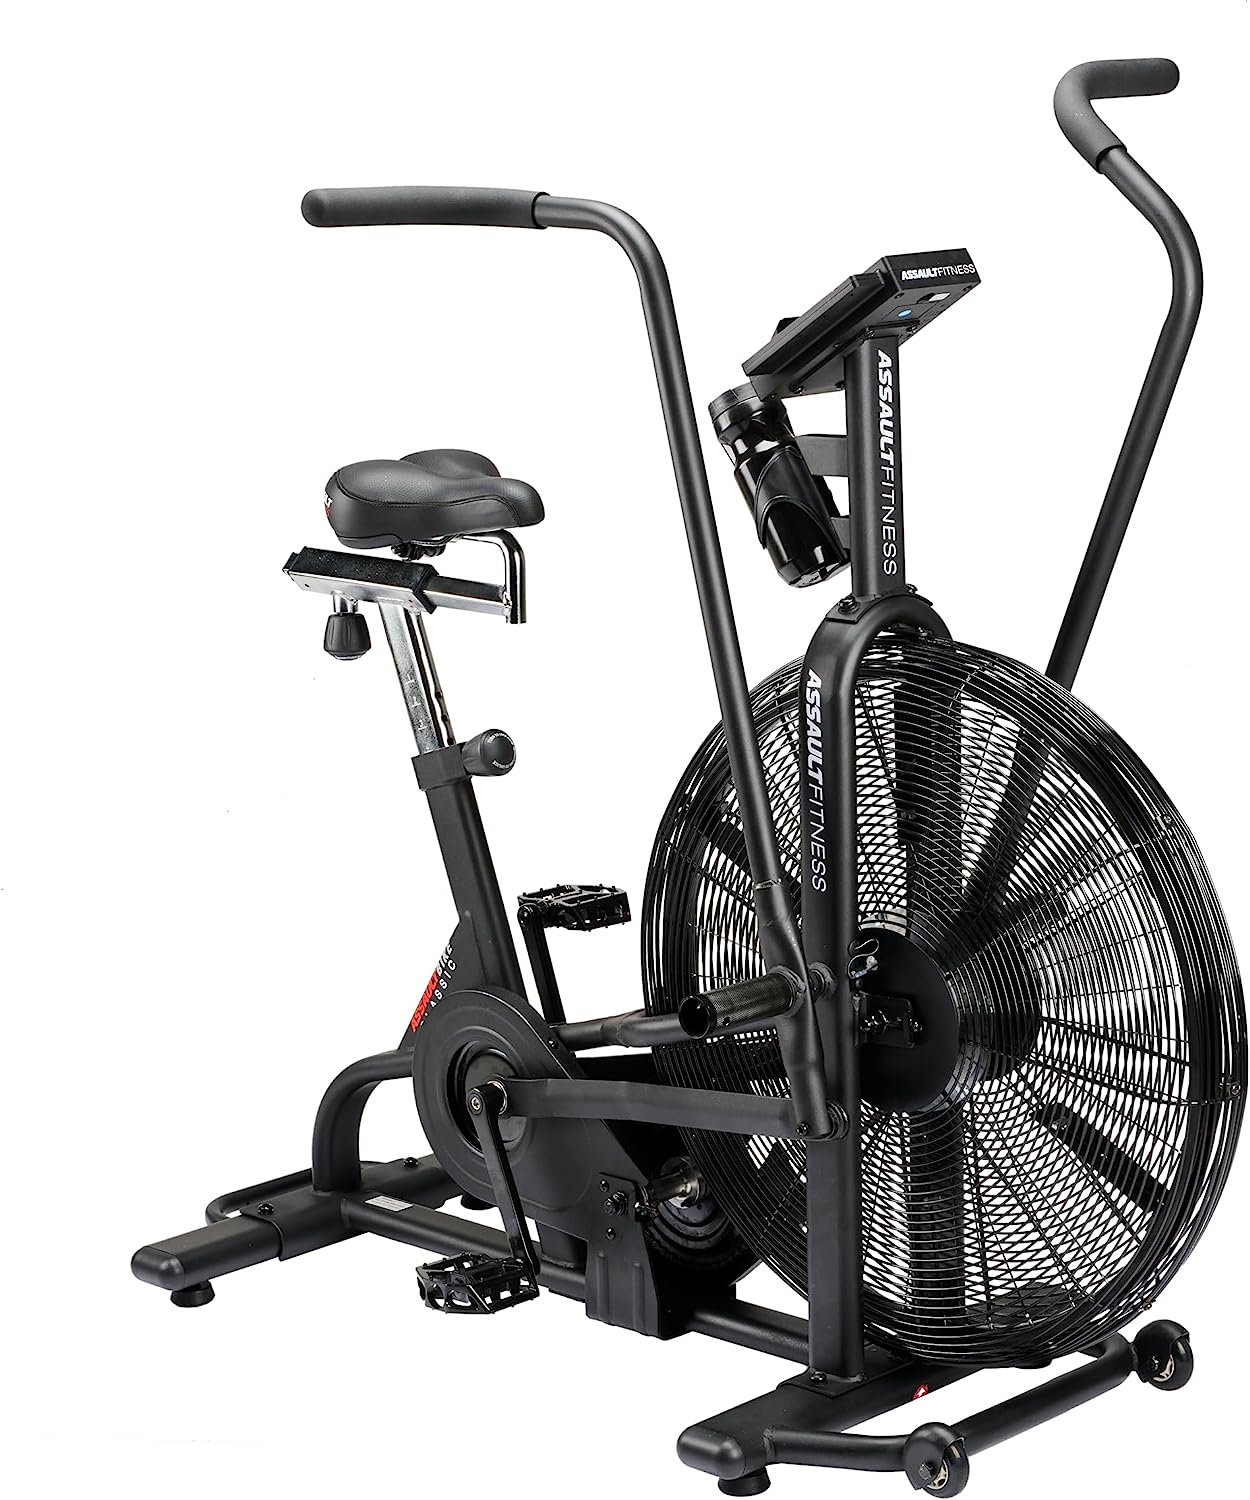 Assault Fitness Air Bike by Life core - image 5 of 16